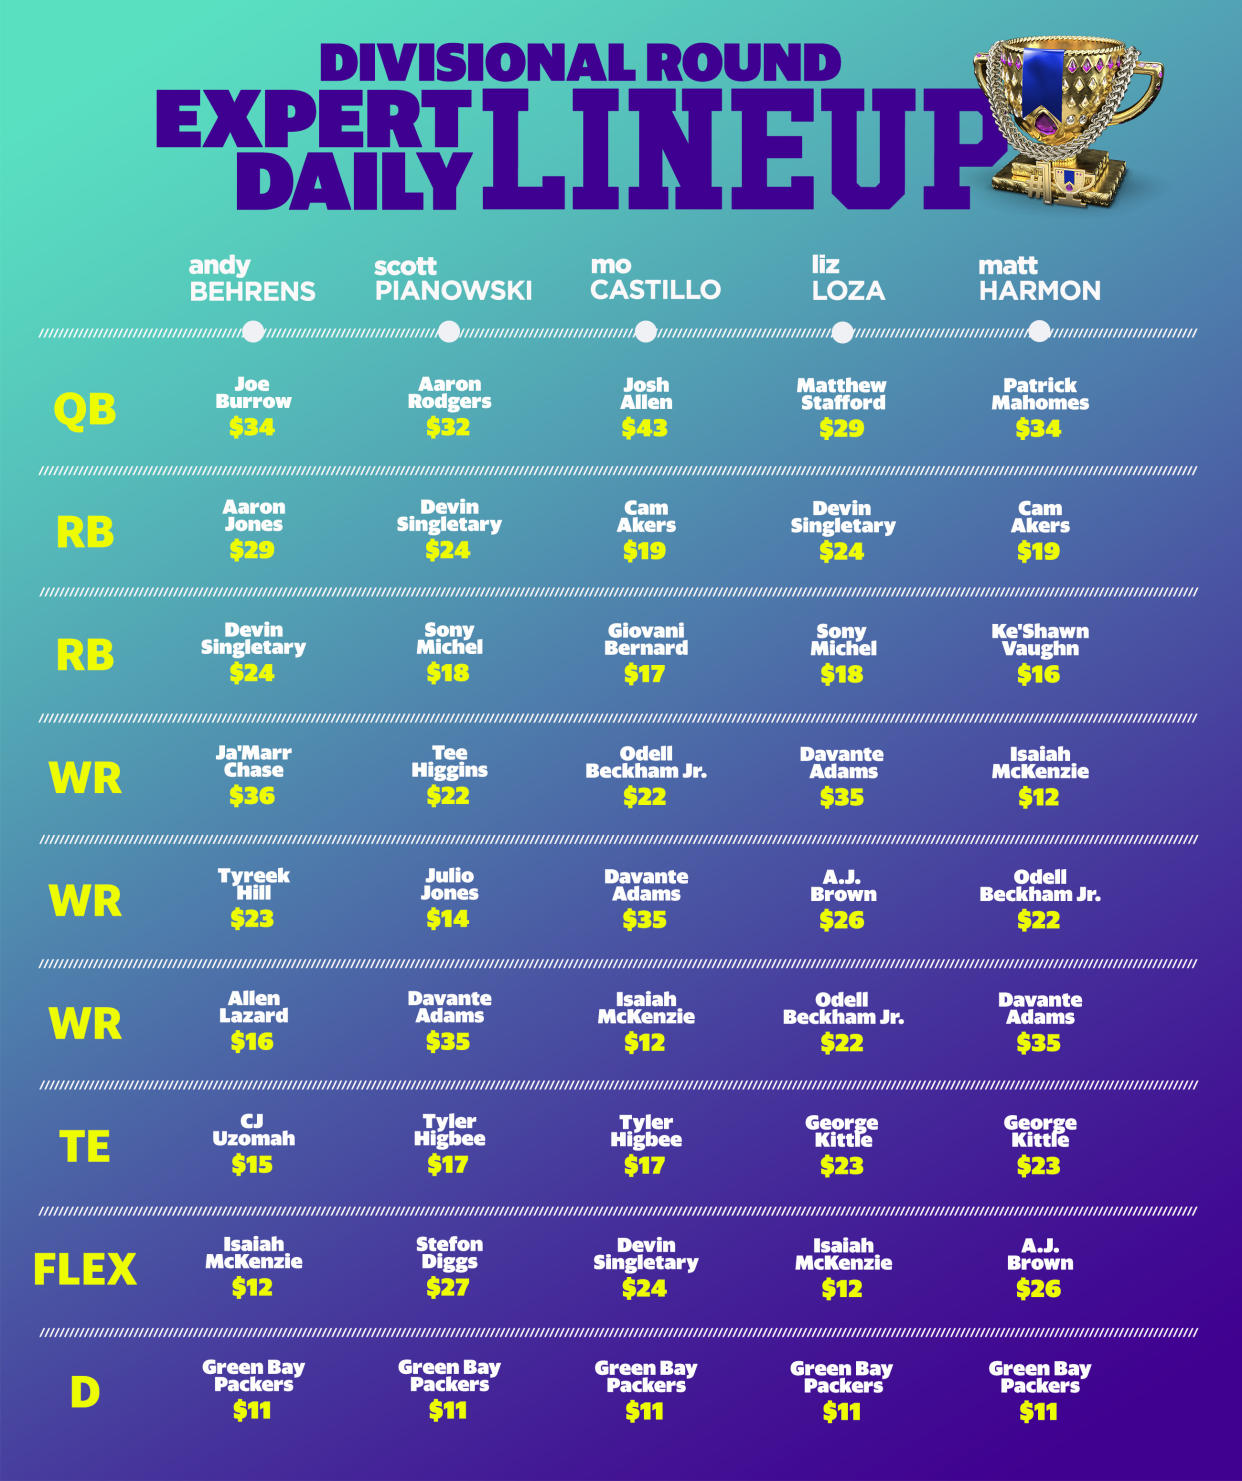 NFL Divisional Round expert daily lineups.